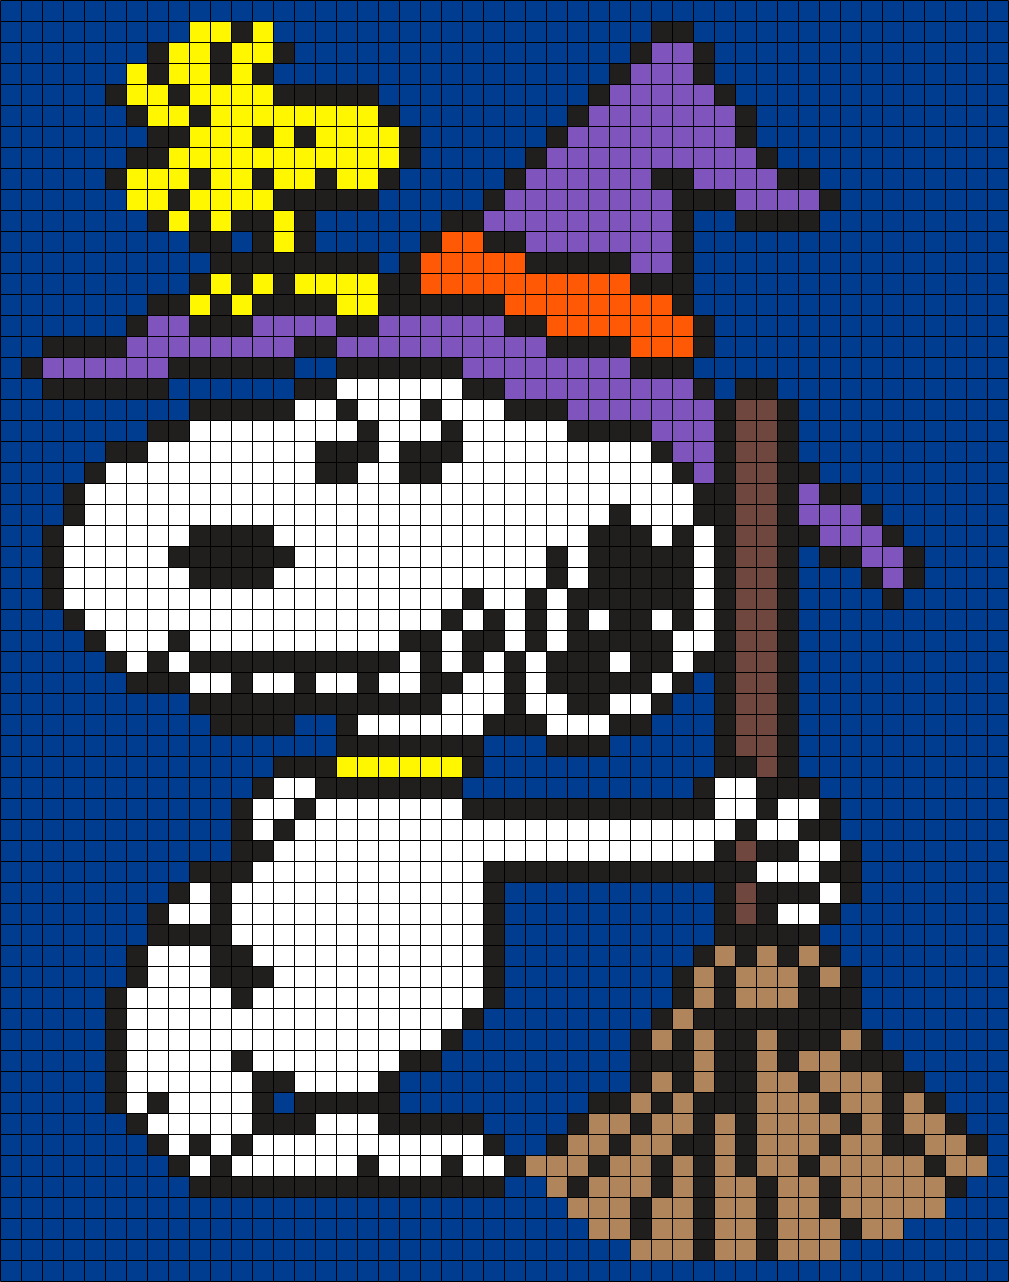 Halloween Snoopy And Woodstock (Square)